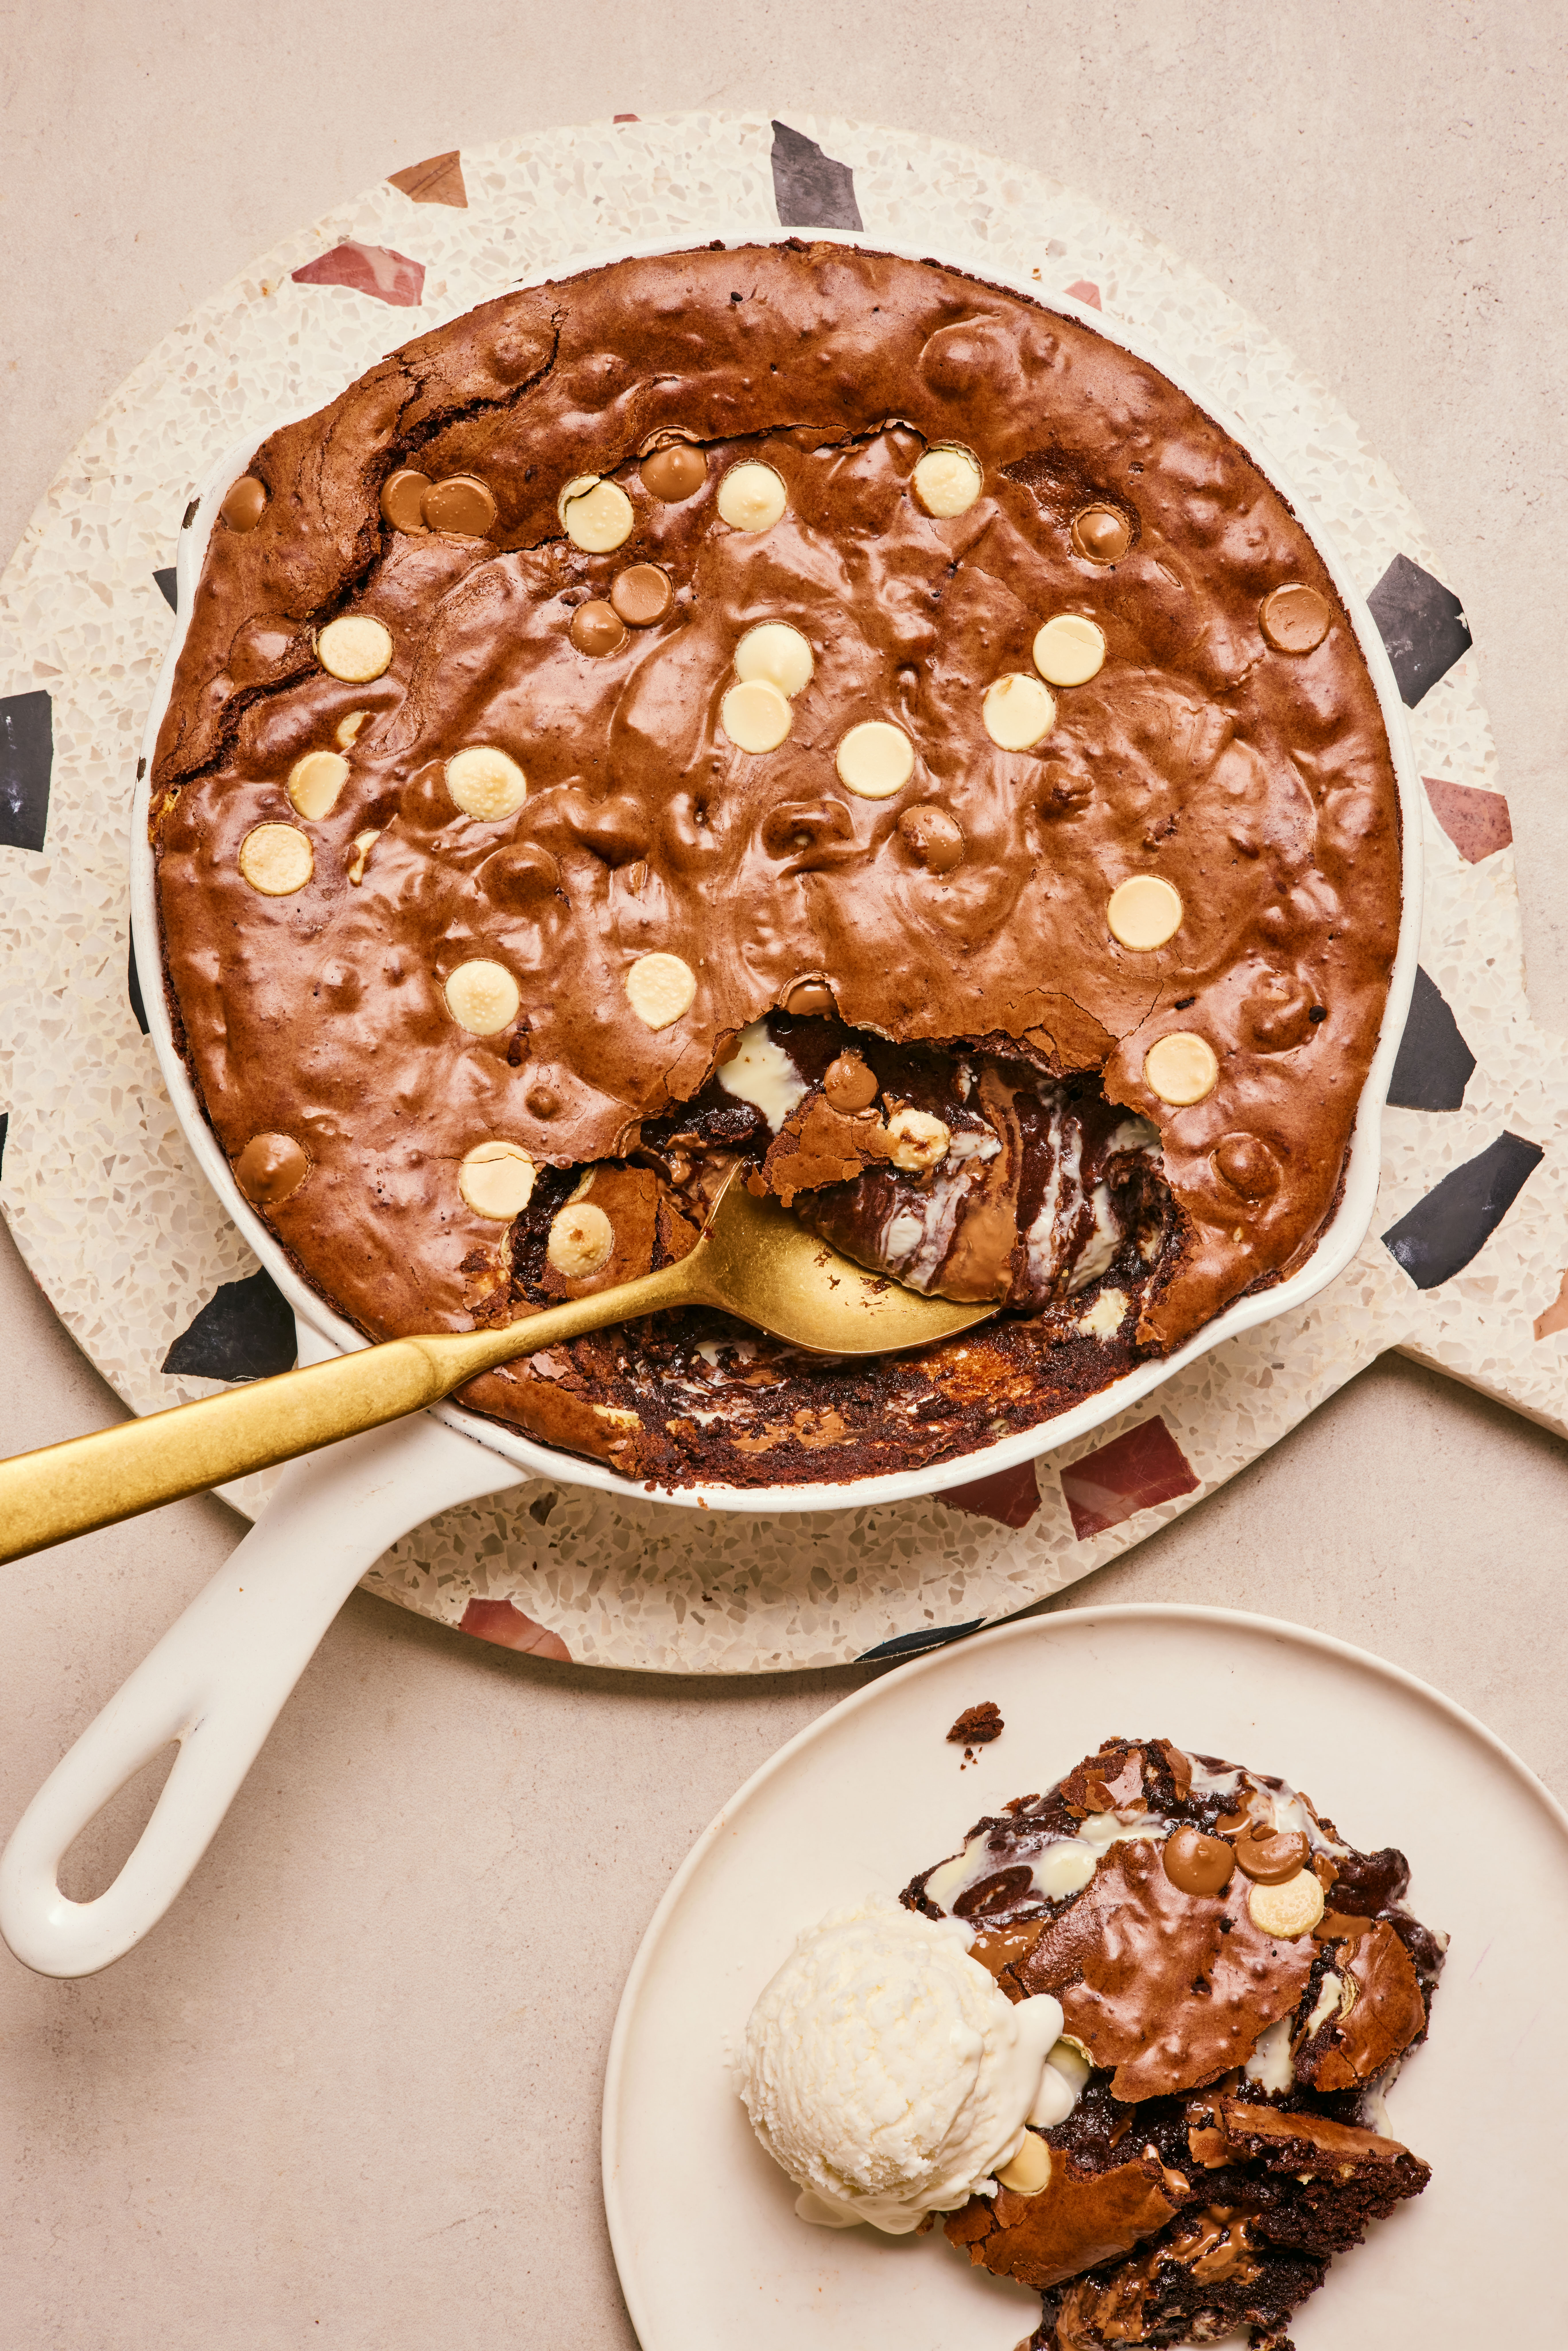 https://thehappyfoodie.co.uk/wp-content/uploads/2023/07/Janes-Patisserie-Giant-Skillet-Brownie.jpg